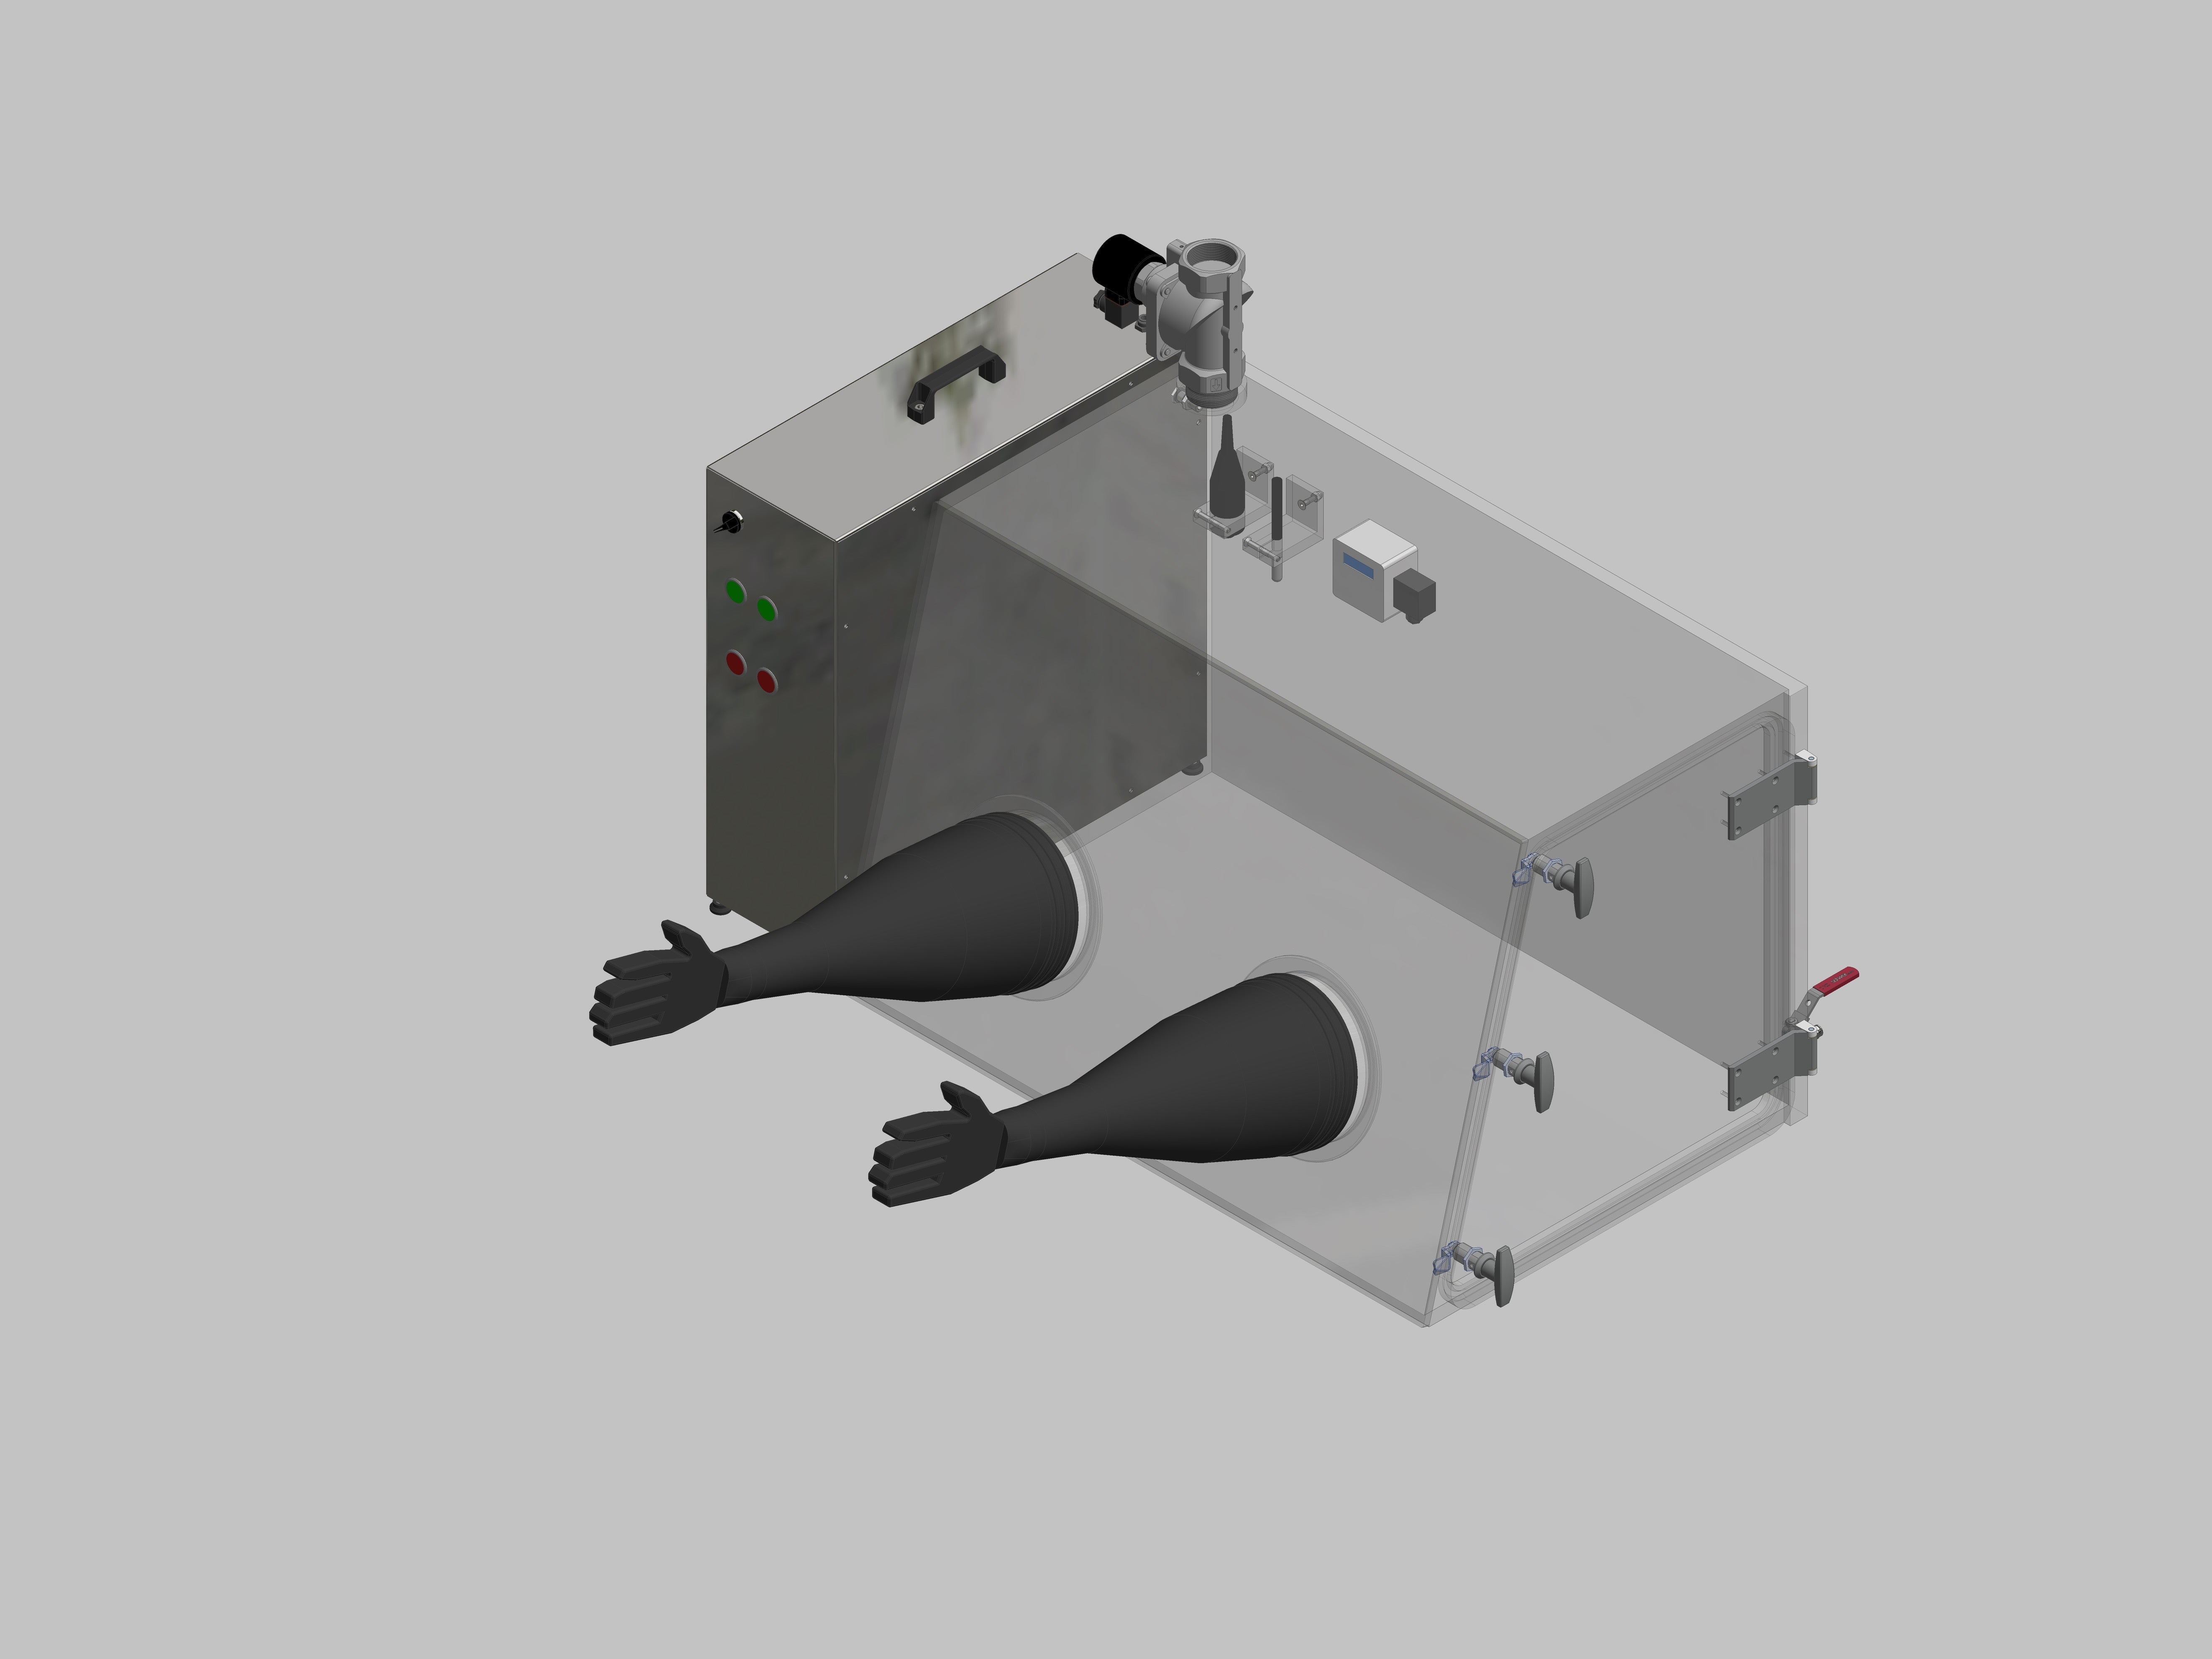 Glovebox made of acrylic&gt; Gas filling: automatic flushing with pressure control, front version: standard, side version: hinged doors Control: humidity controller and oxygen display with data logger